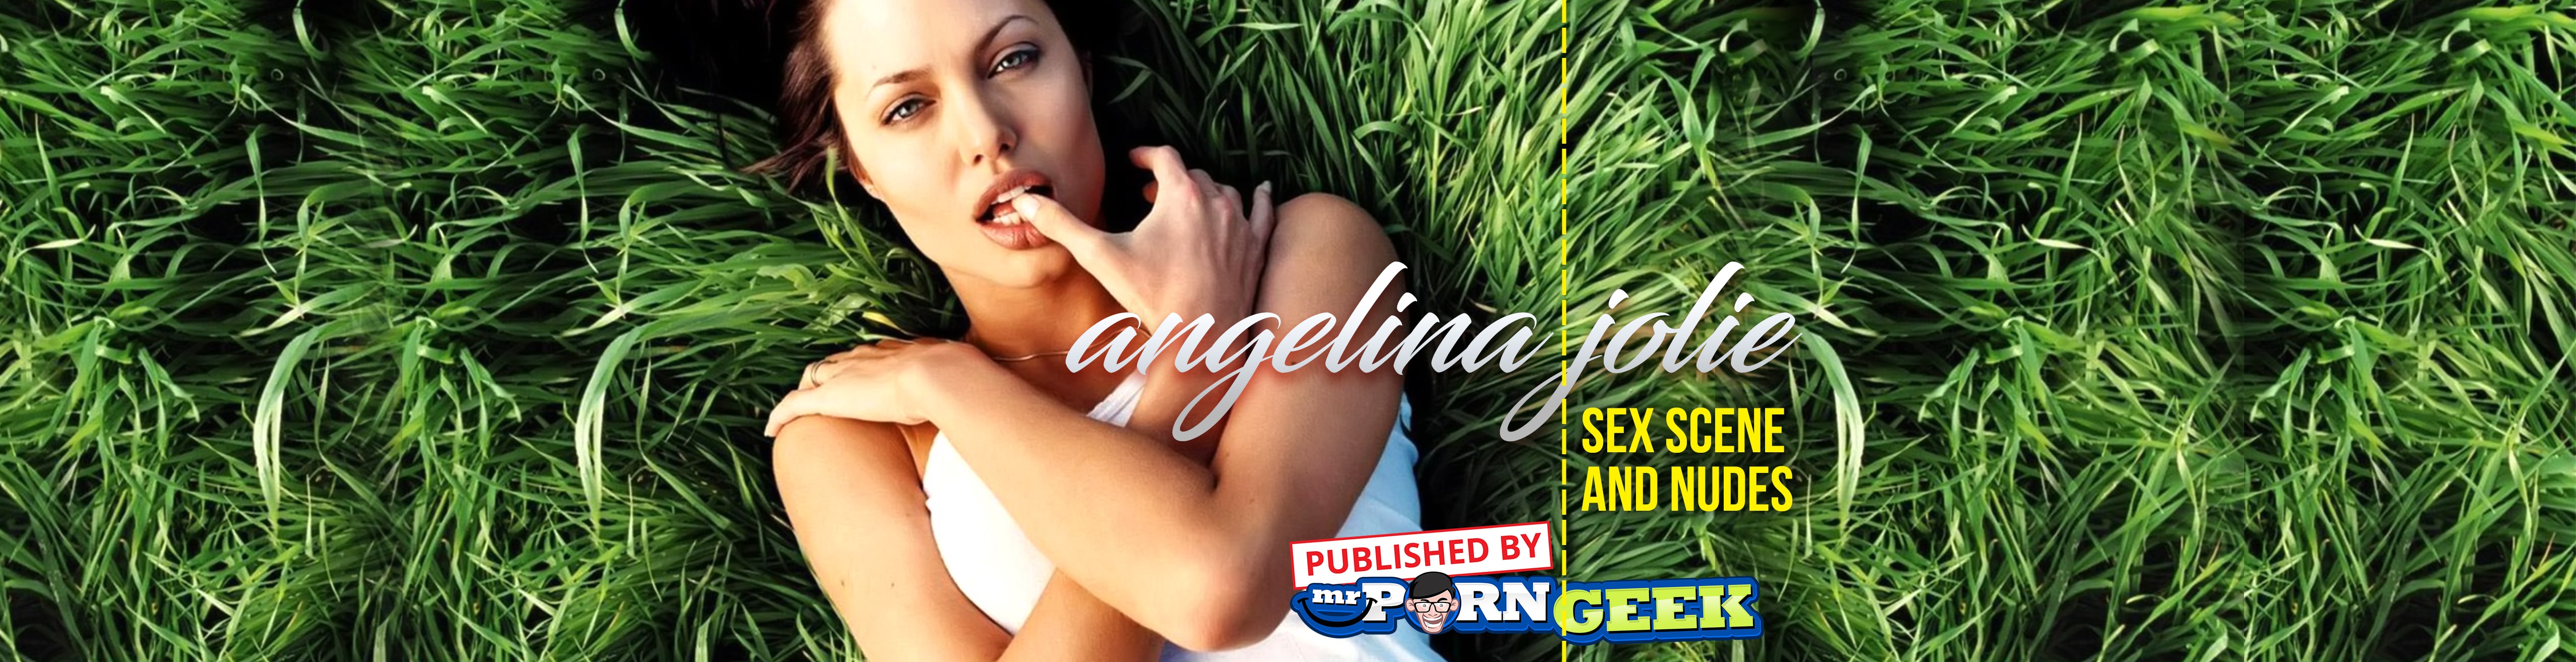 Angelina Jolie Sex Scene - Get The Top Angelina Jolie Naked Sex Scene And Nudes At Mr. Porn Geek